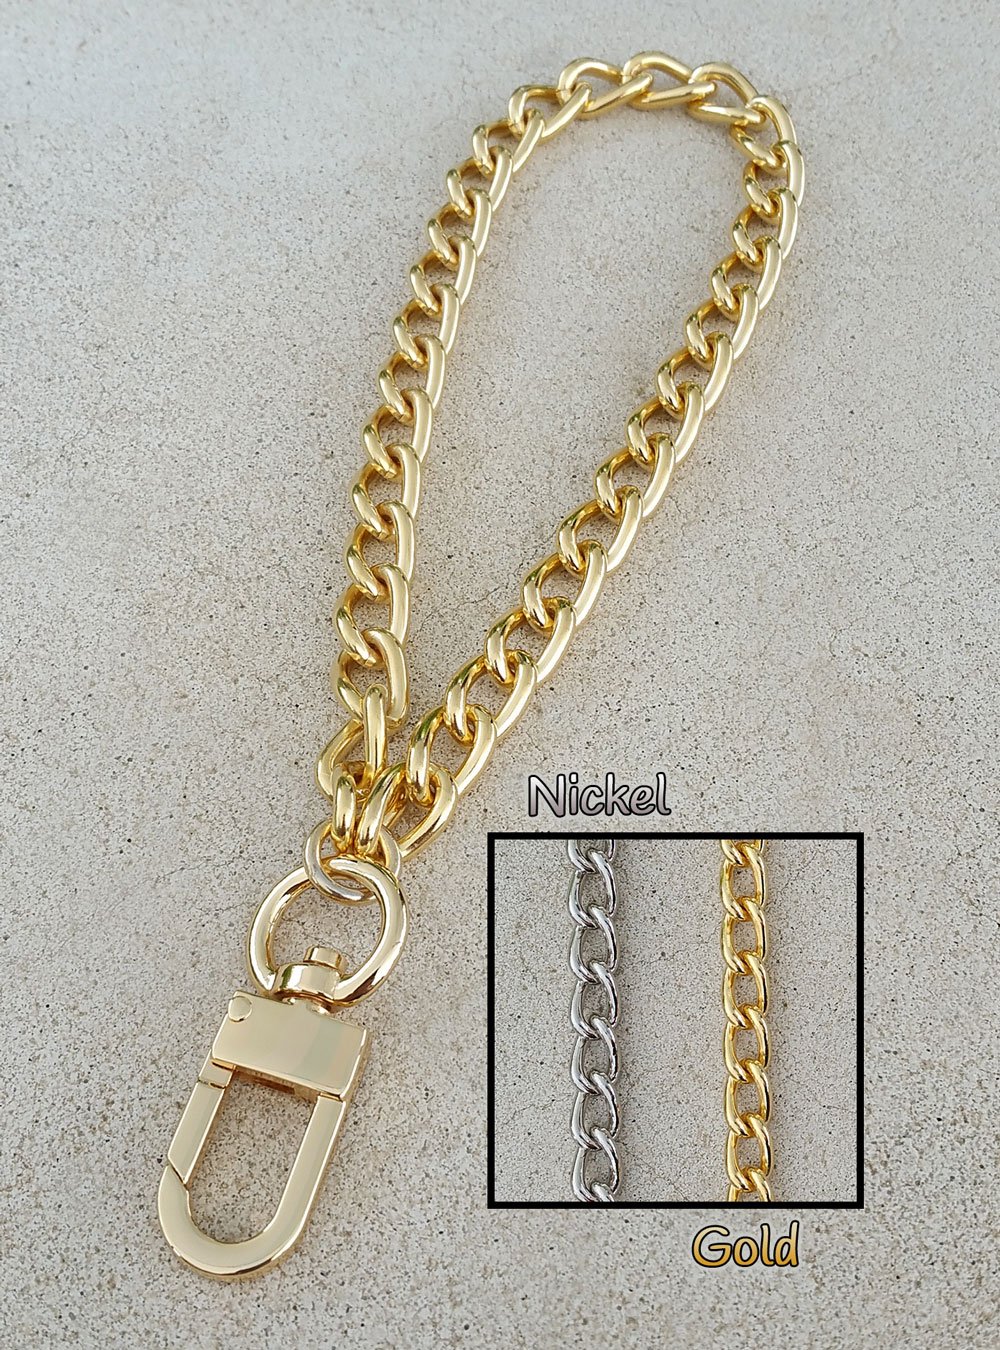 Image of GOLD or NICKEL Chain Wrist Strap - Classy Curb Chain - 3/8" (9mm) Wide - Choose Size & Hook Style